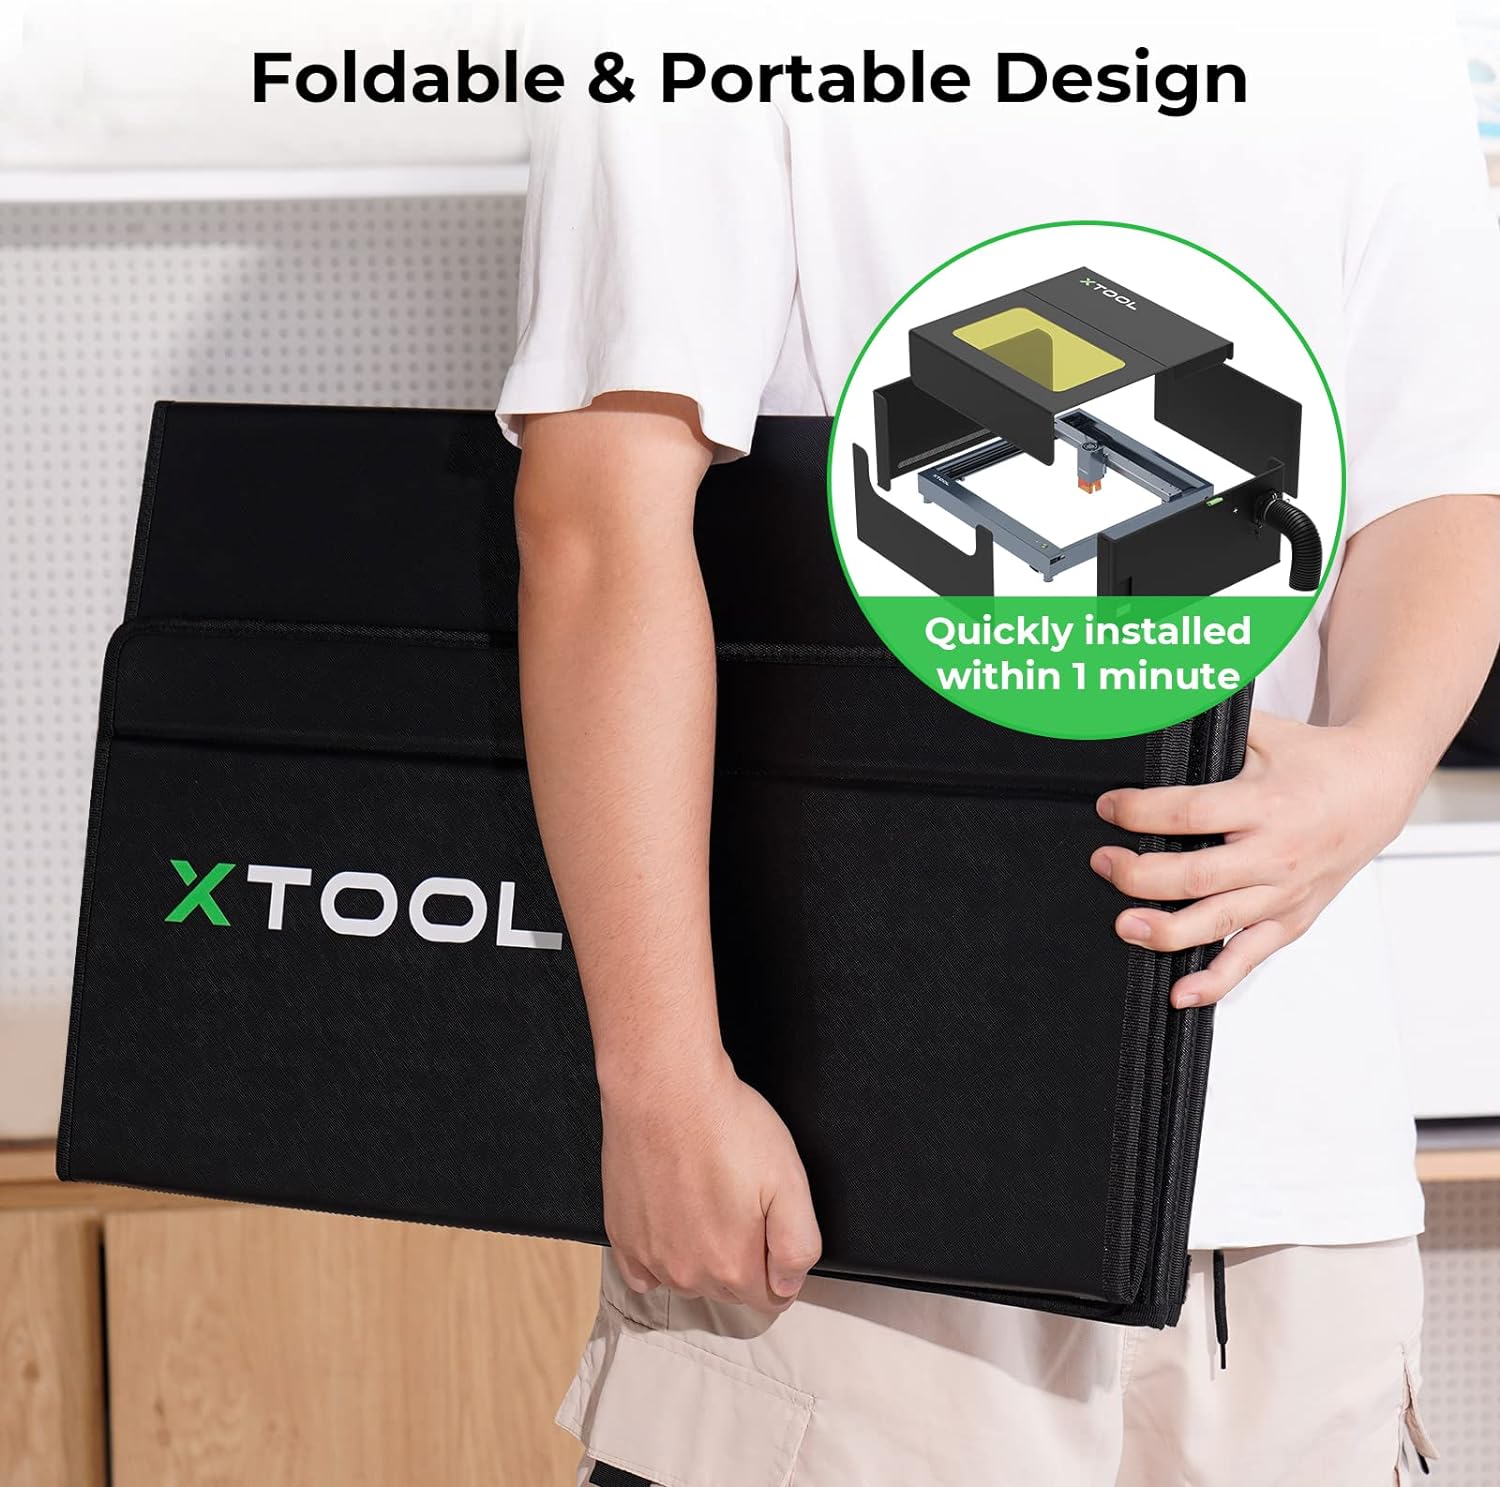 xTool Enclosure Portable Foldable Cover for Laser Engraver